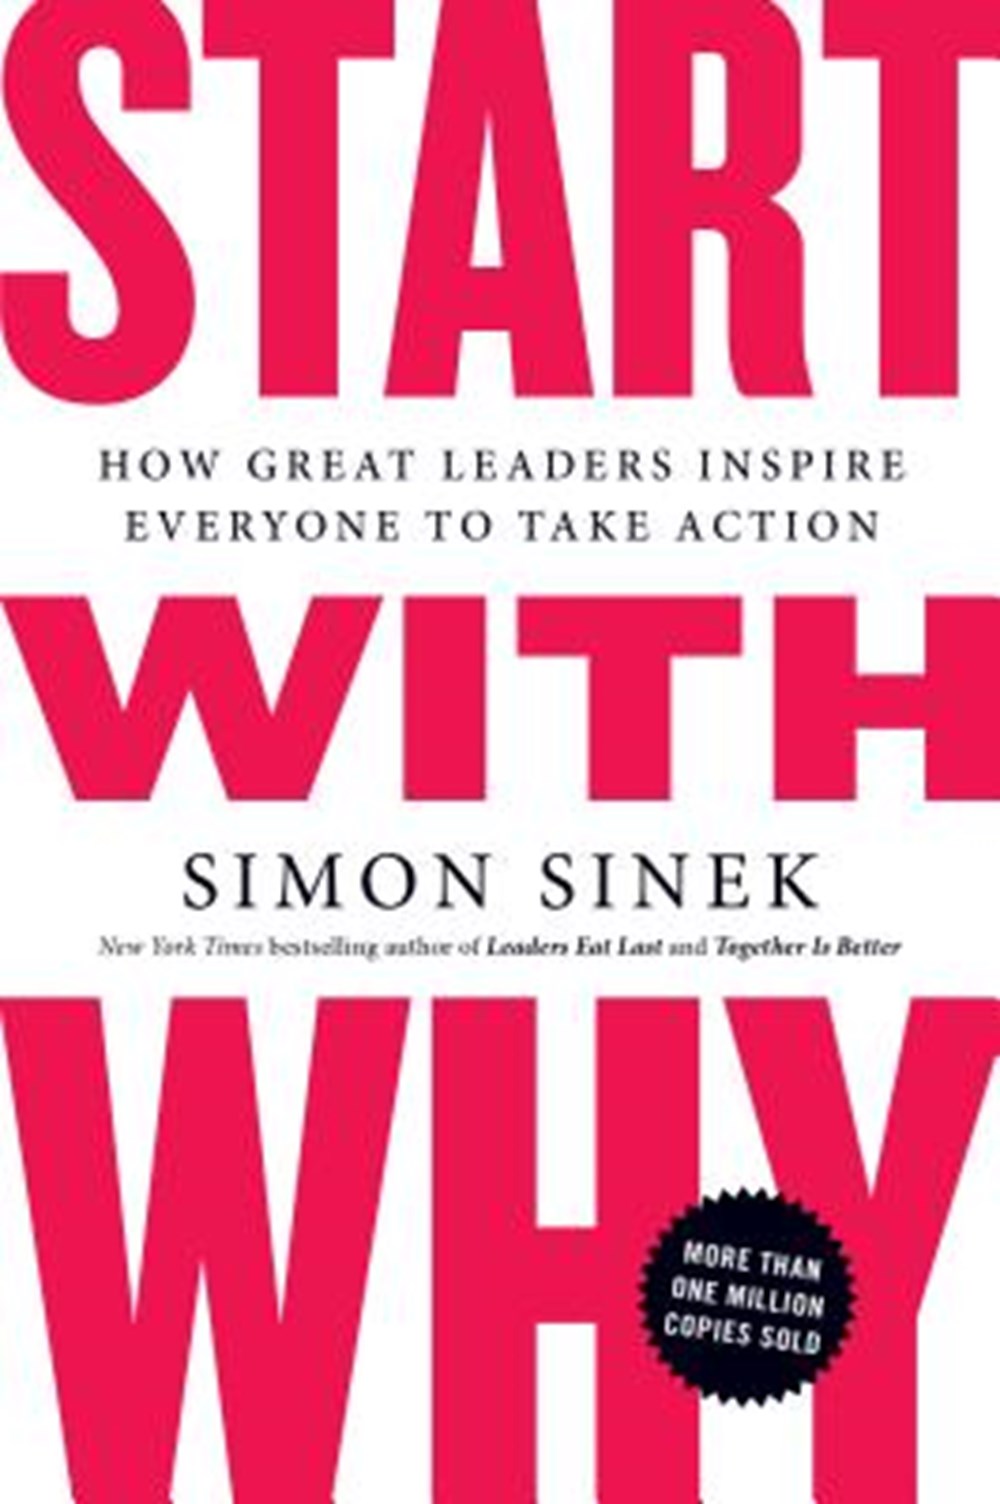 Start with Why How Great Leaders Inspire Everyone to Take Action